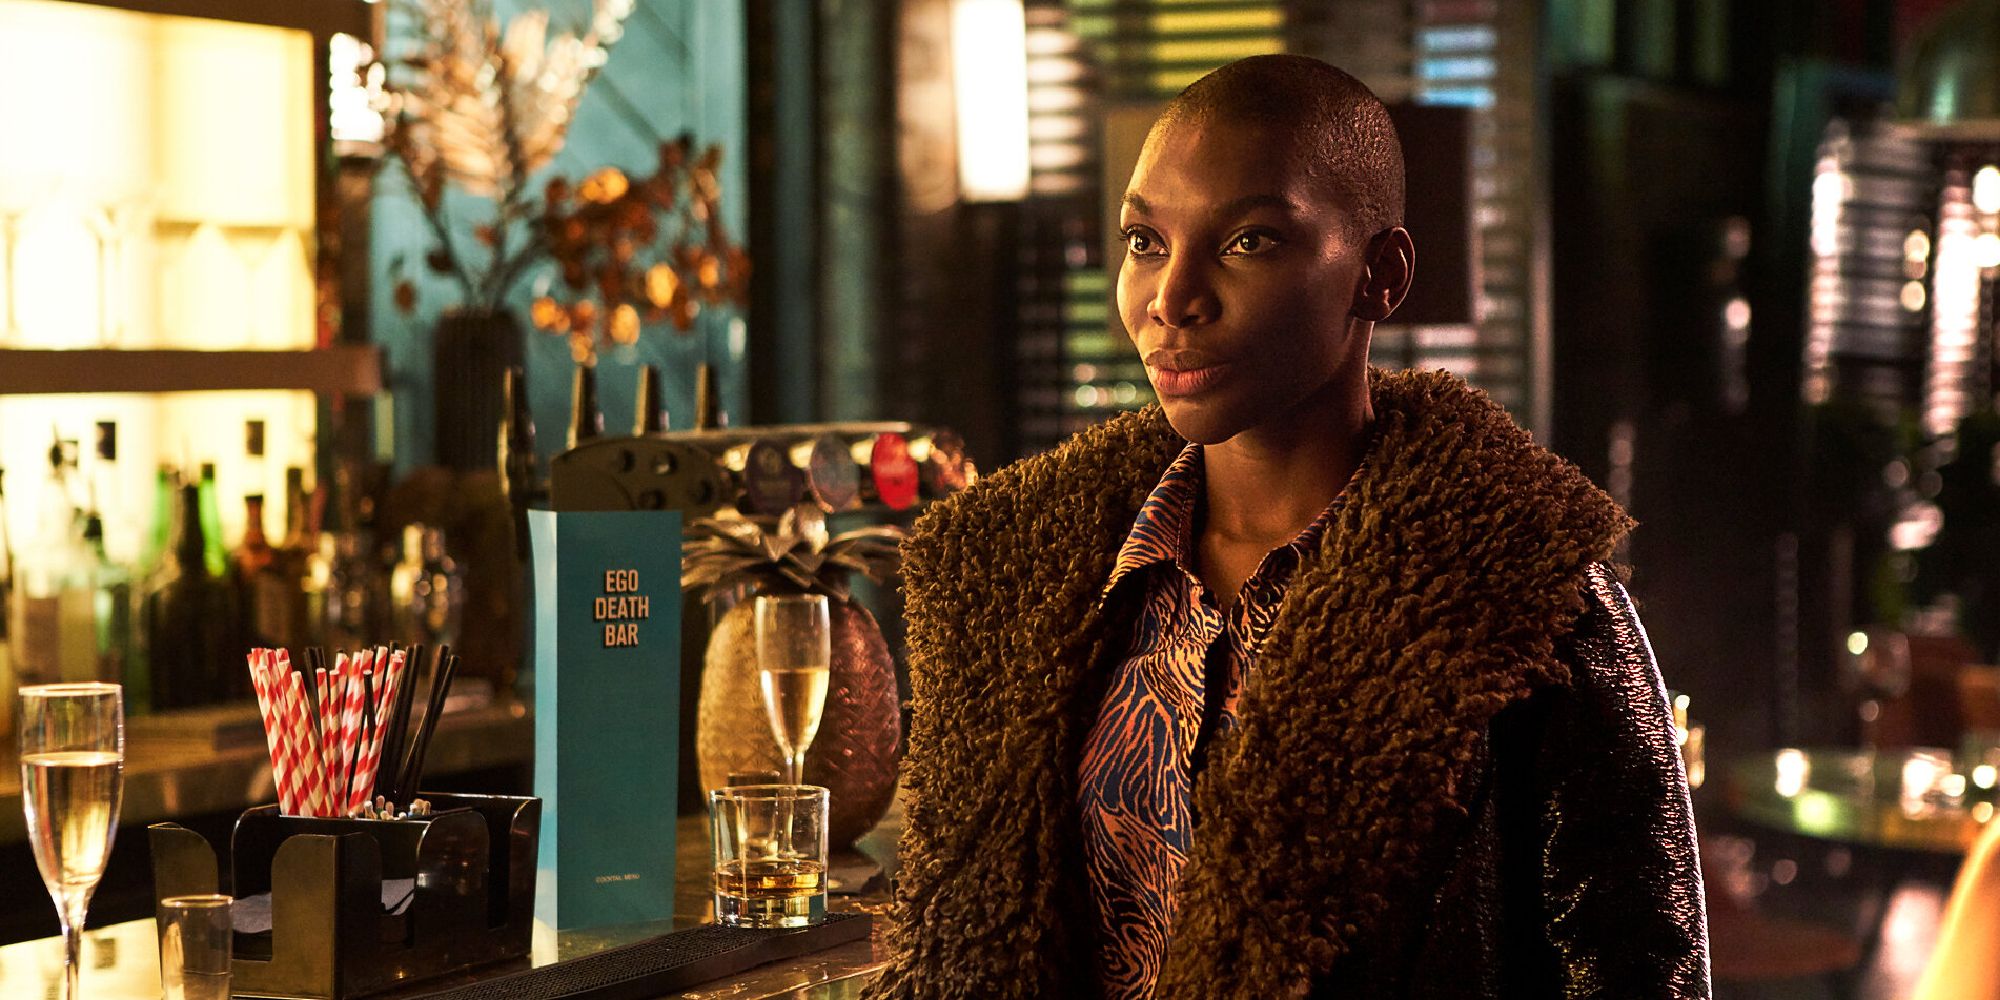 Michaela Coel as Arabelle with a shaved head at a bar